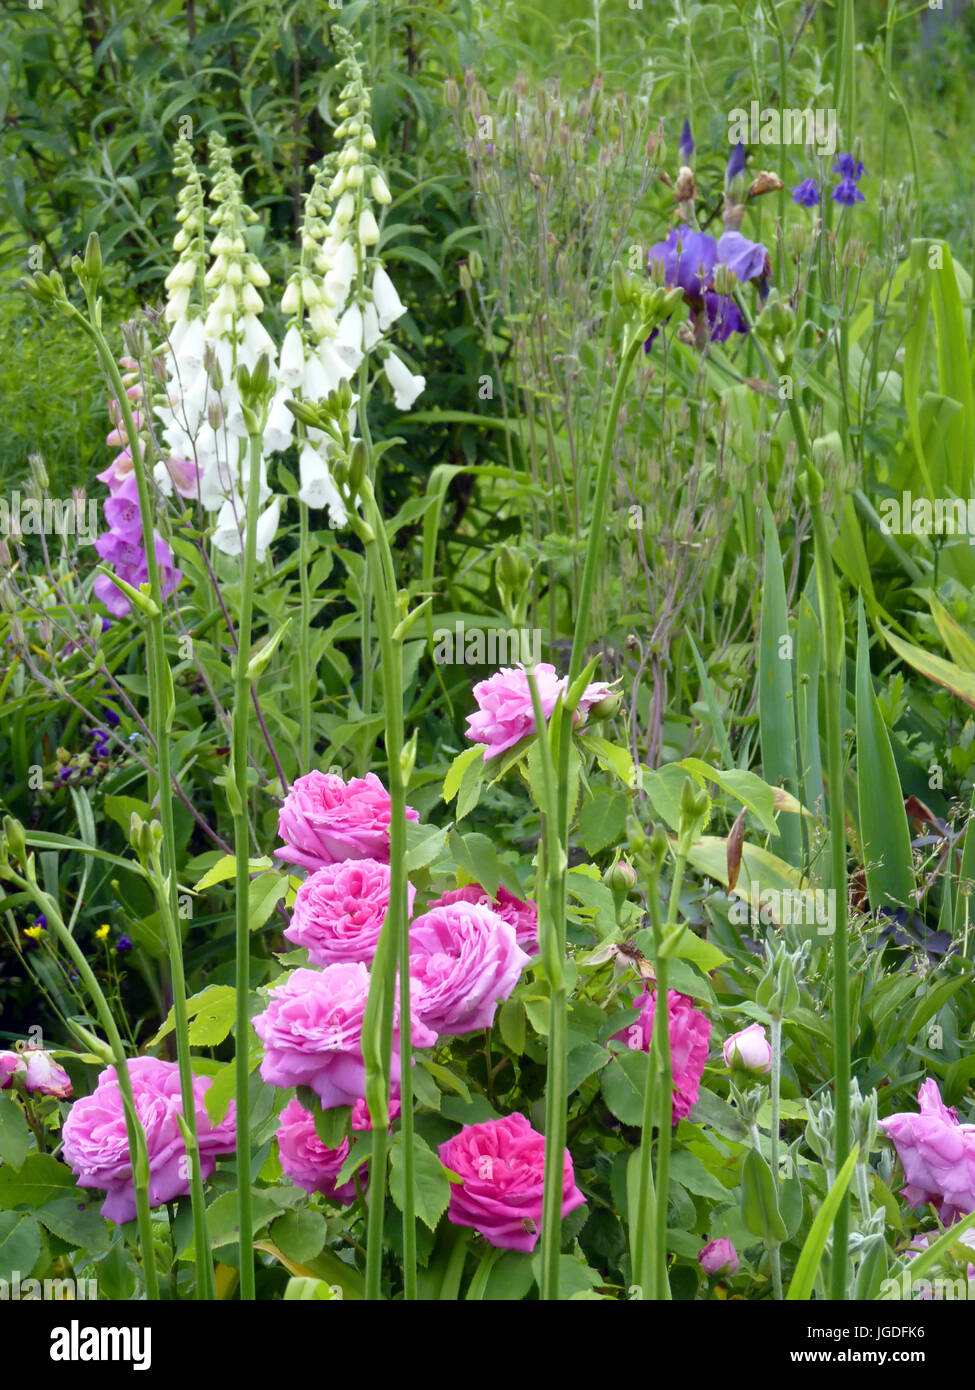 Flower garden with pink roses,iris and foxgloves Stock Photo